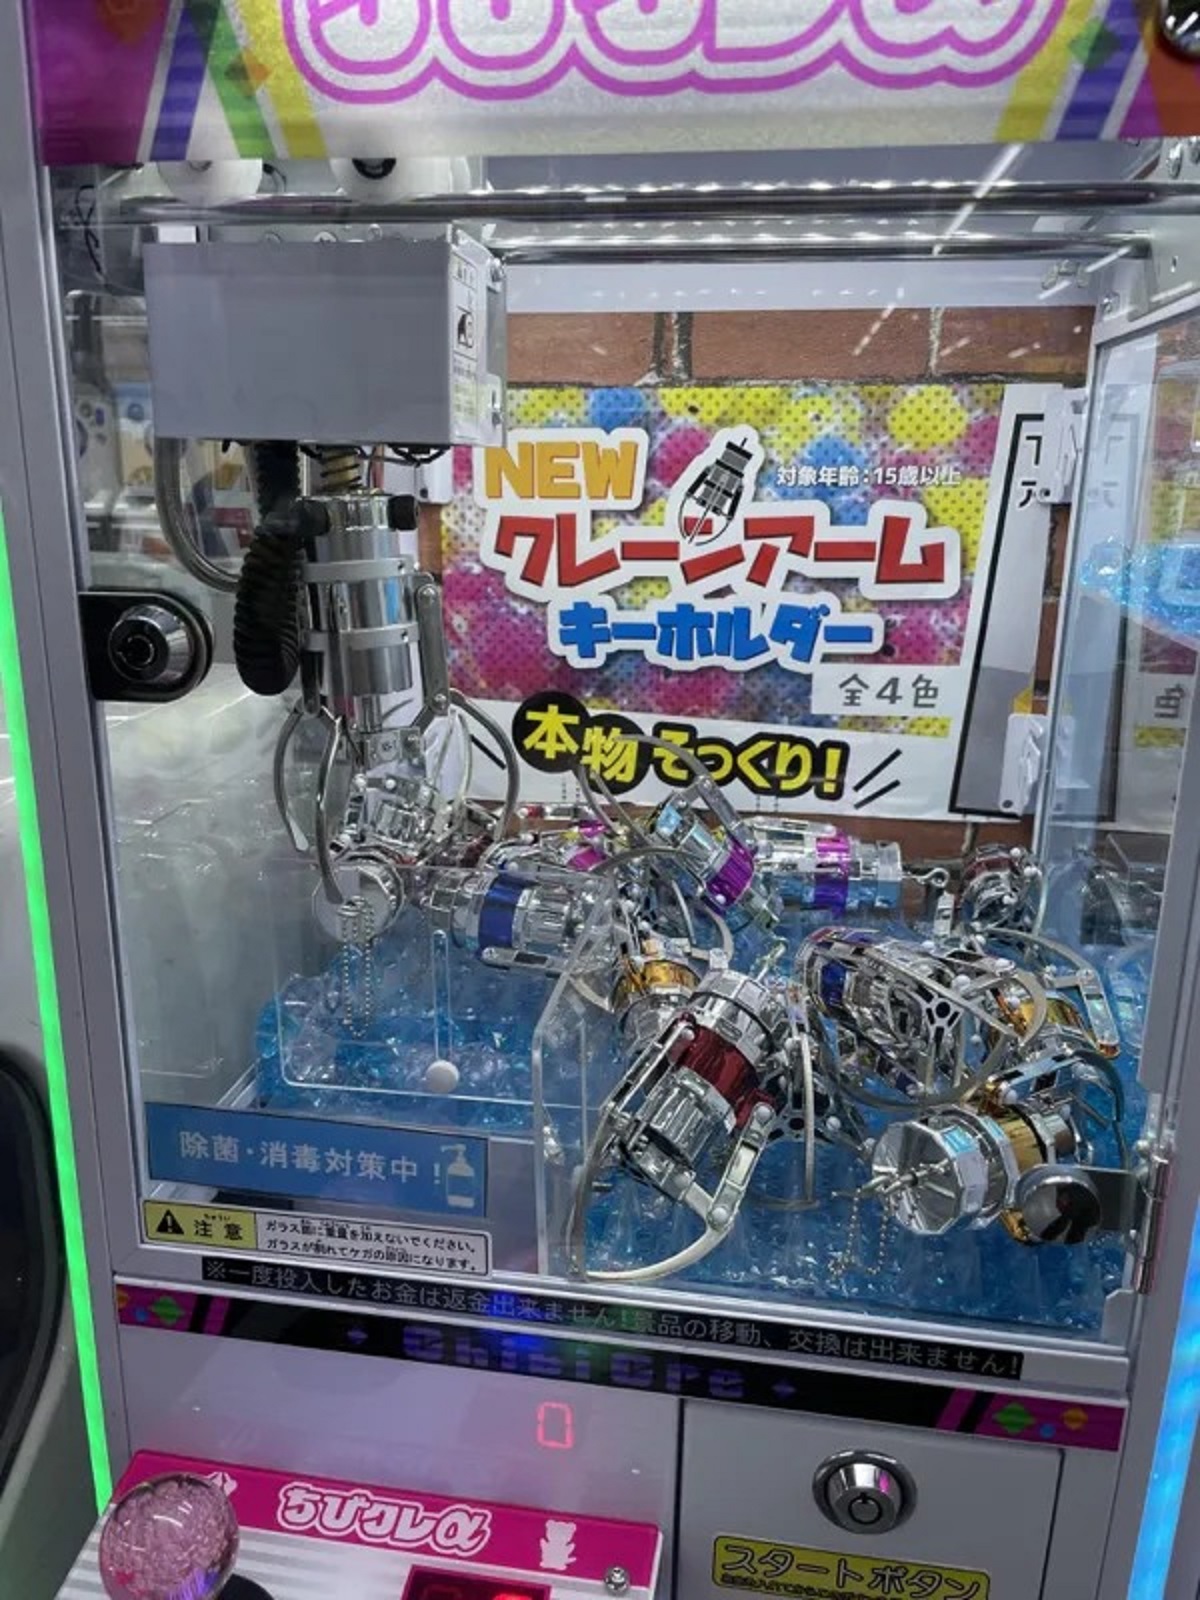 This Claw machine in Japan has claws as prize.